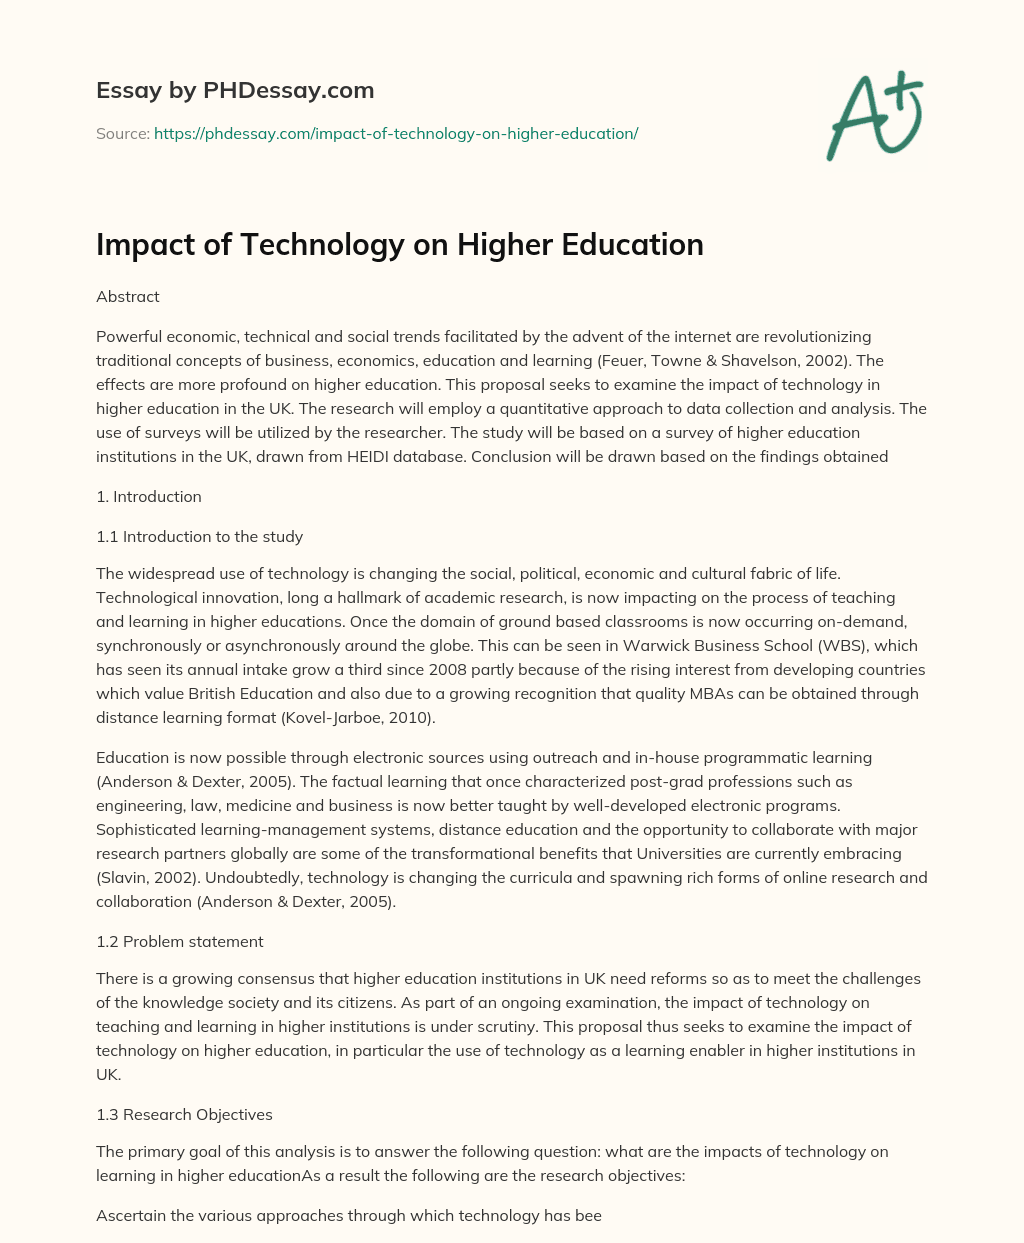 Impact of Technology on Higher Education essay